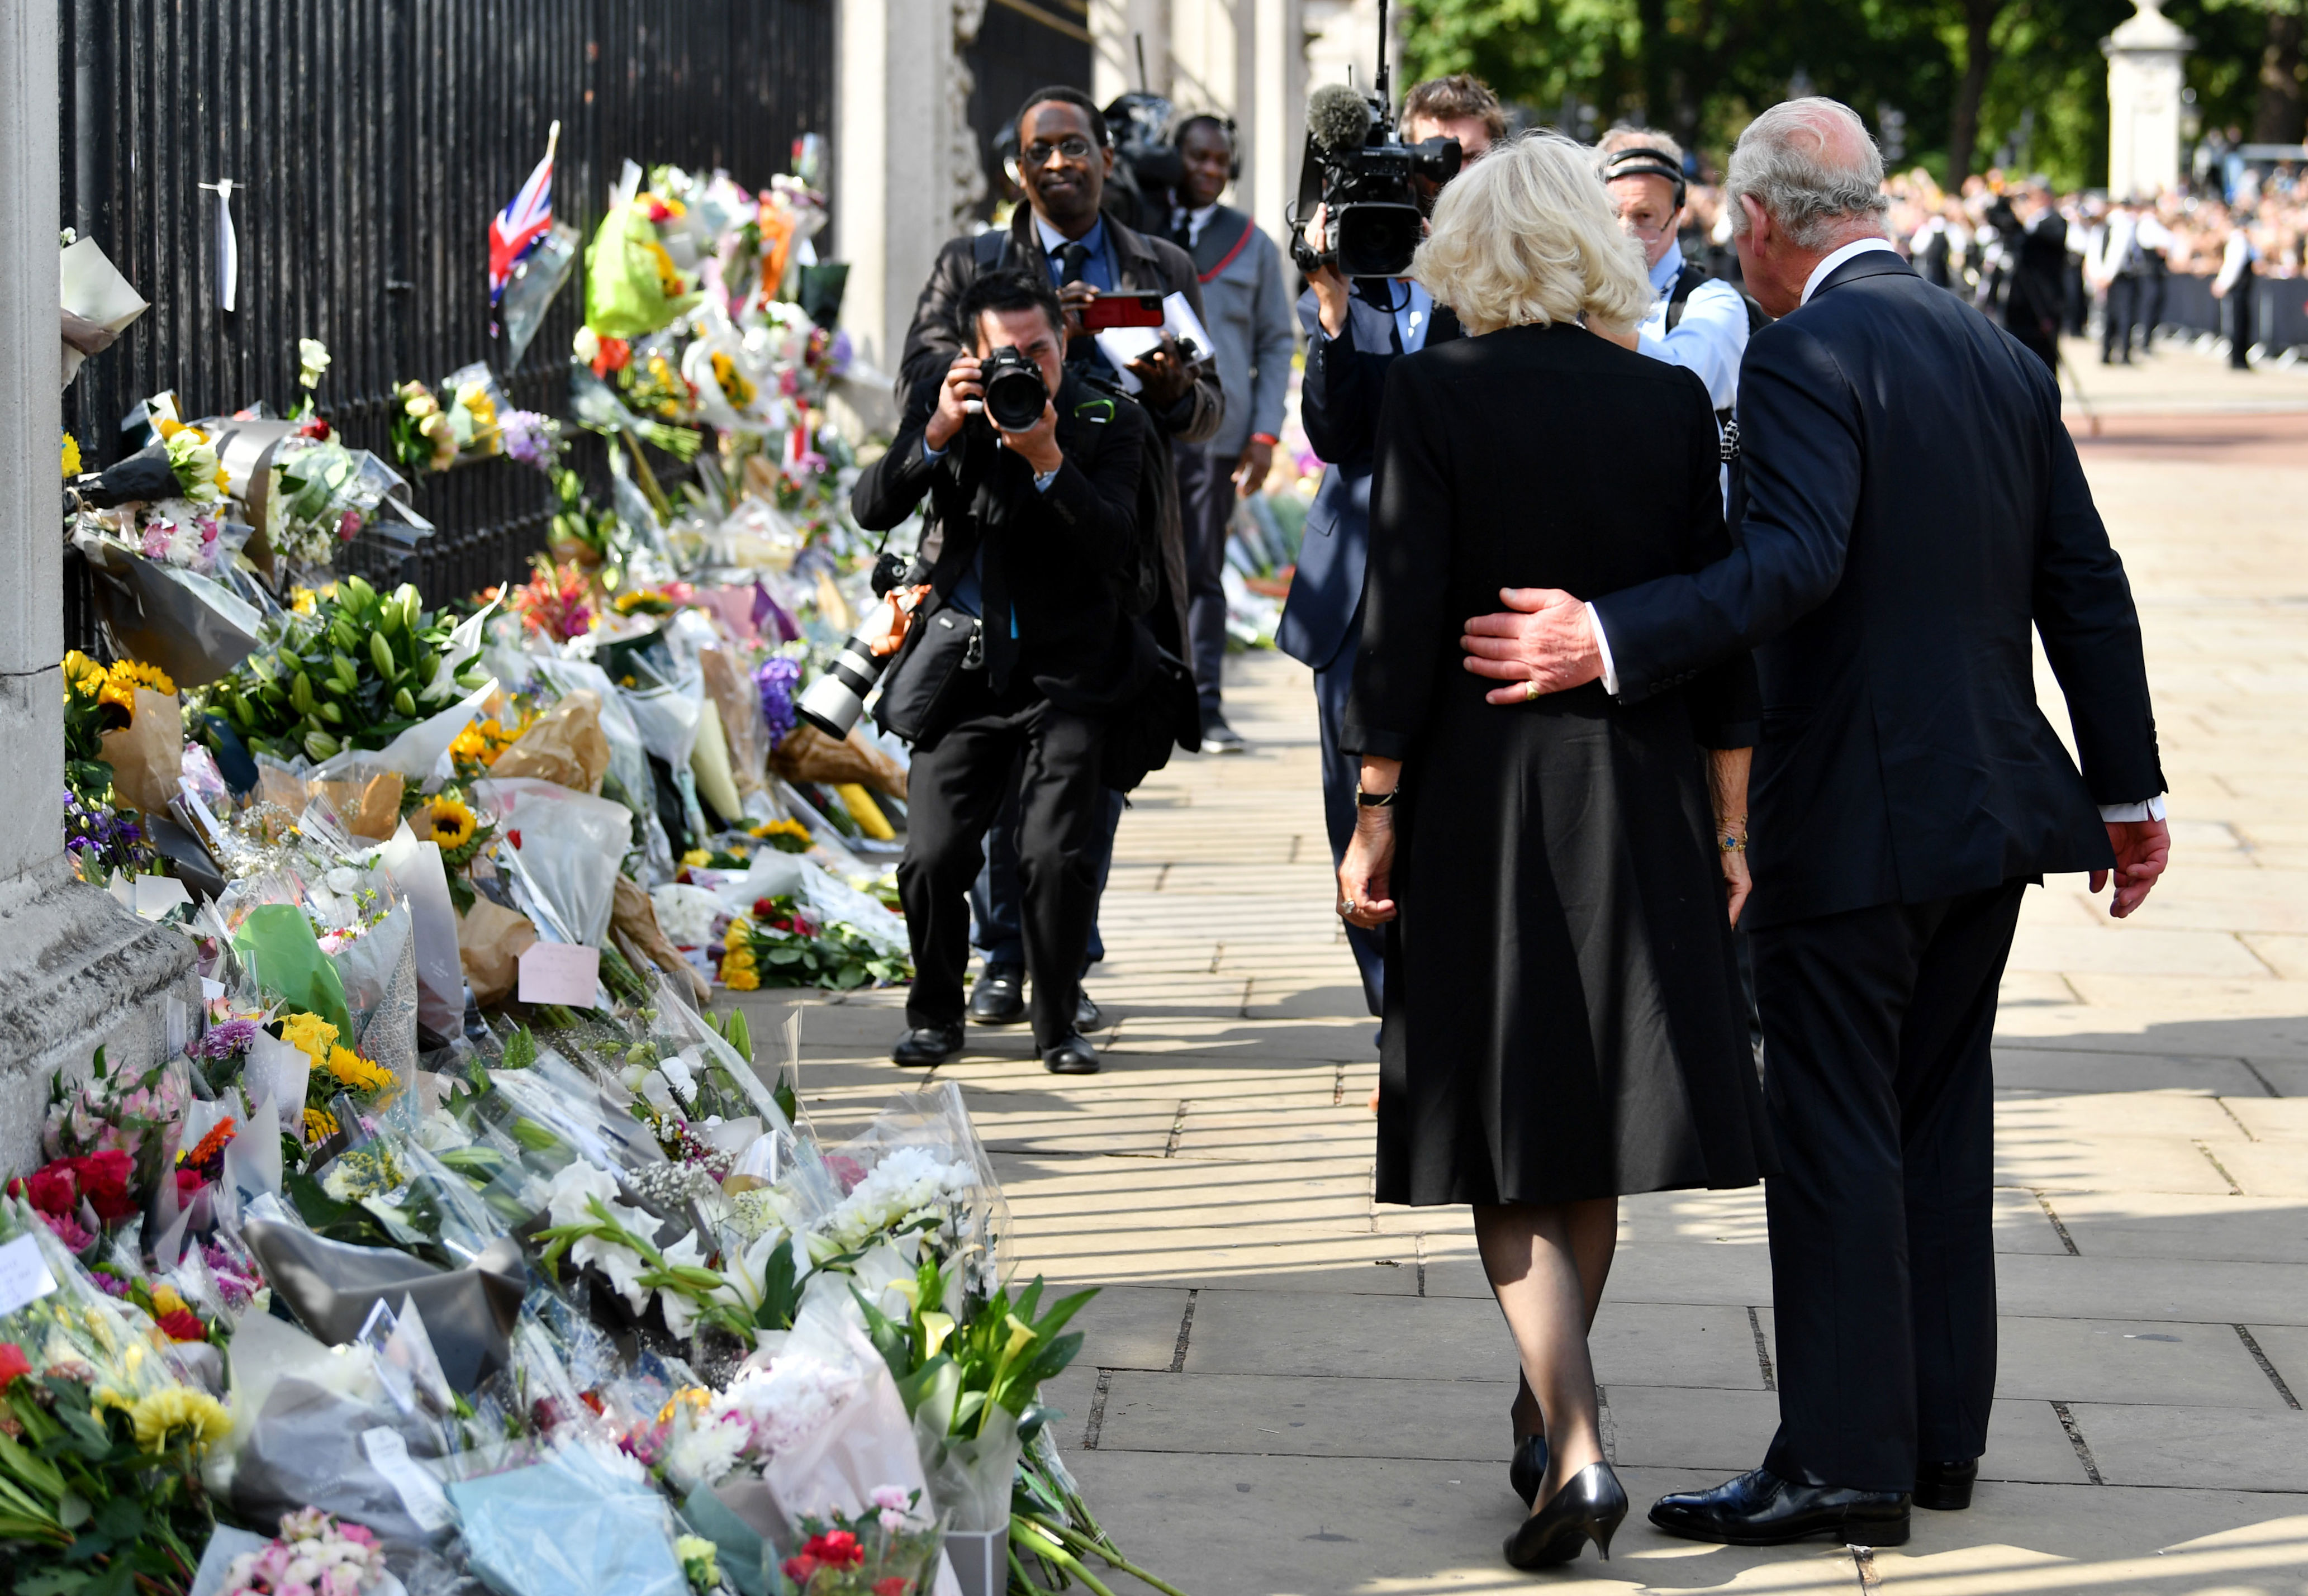 <p>King Charles III put a loving arm around his wife, Camilla, Queen Consort, as they took in the tributes left for his mother, Queen Elizabeth II, outside Buckingham Palace in London on Sept. 9, 2022, the morning after <a href="https://www.wonderwall.com/celebrity/celebrities-dignitaries-react-to-death-of-queen-elizabeth-ii-647756.gallery">the monarch who spent 70 years on the throne died in Scotland</a>.</p>